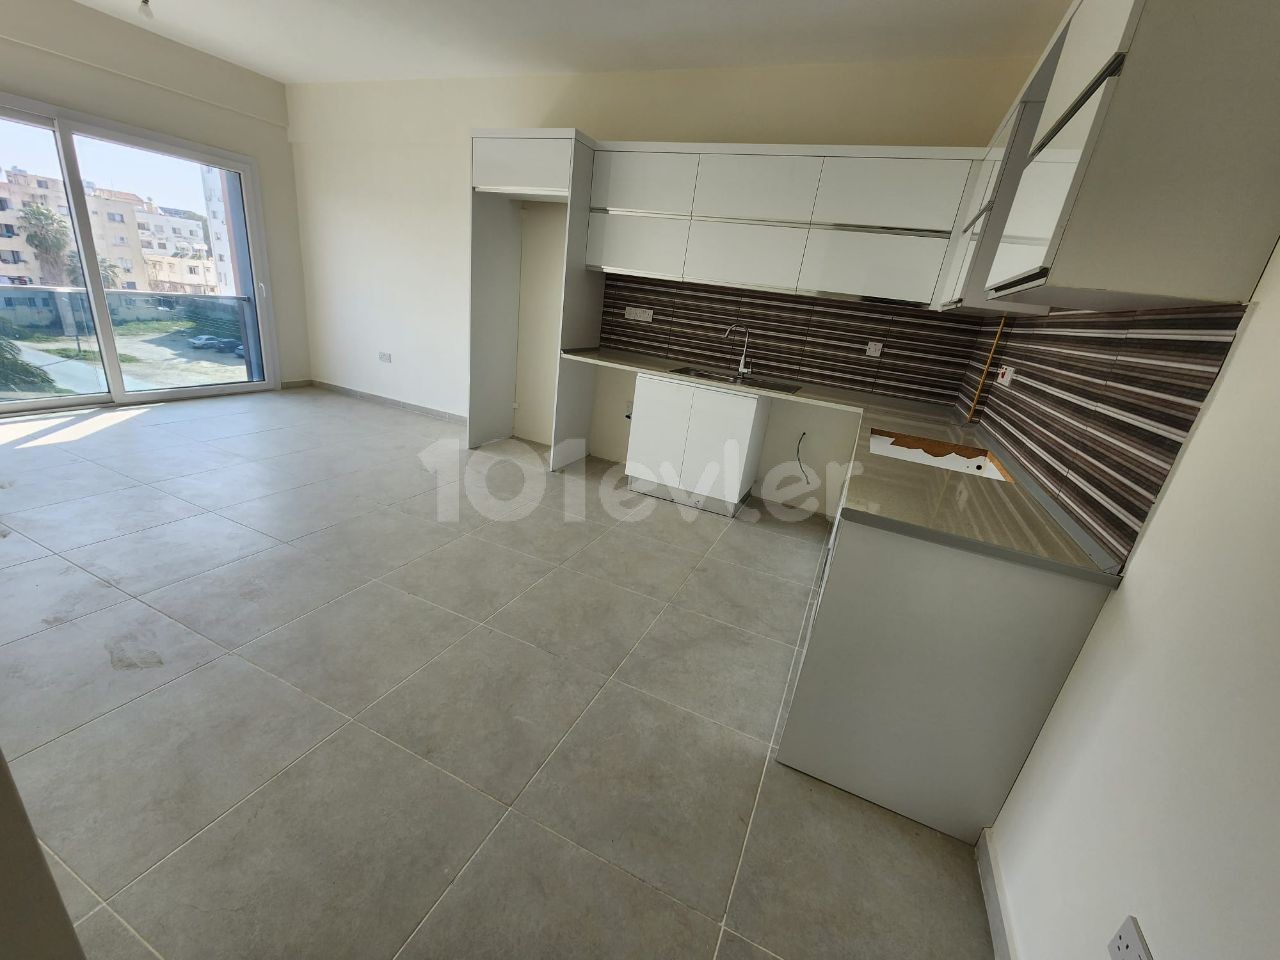 2+1 new apartment for sale in the center of Famagusta in a central location 